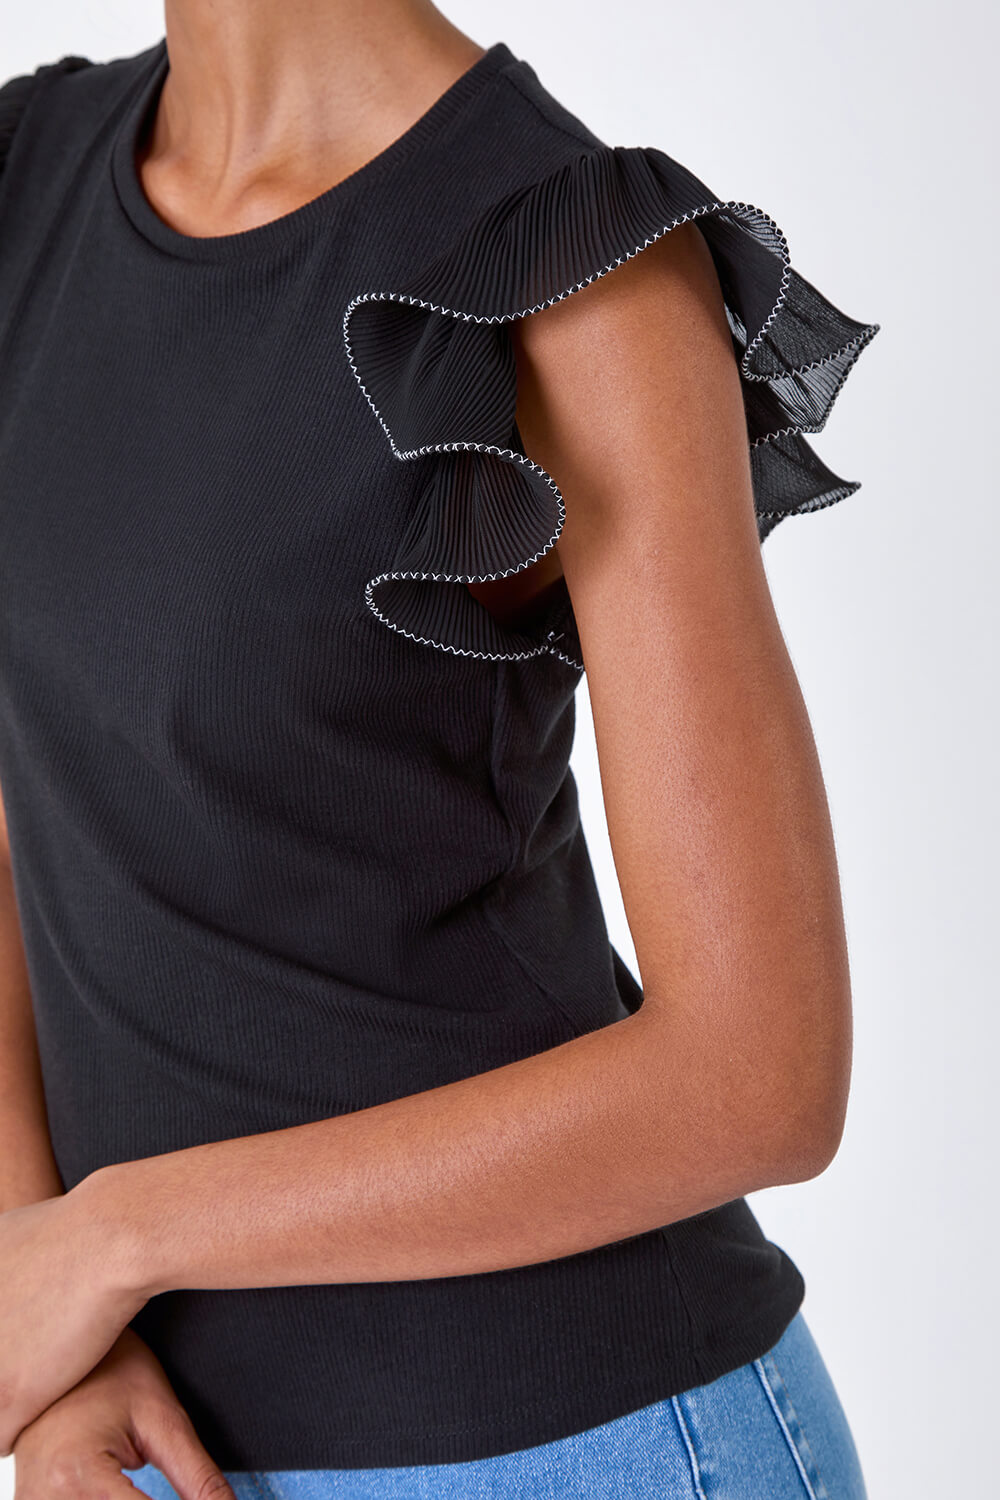 Black Ribbed Stretch Frill Detail Top, Image 5 of 7